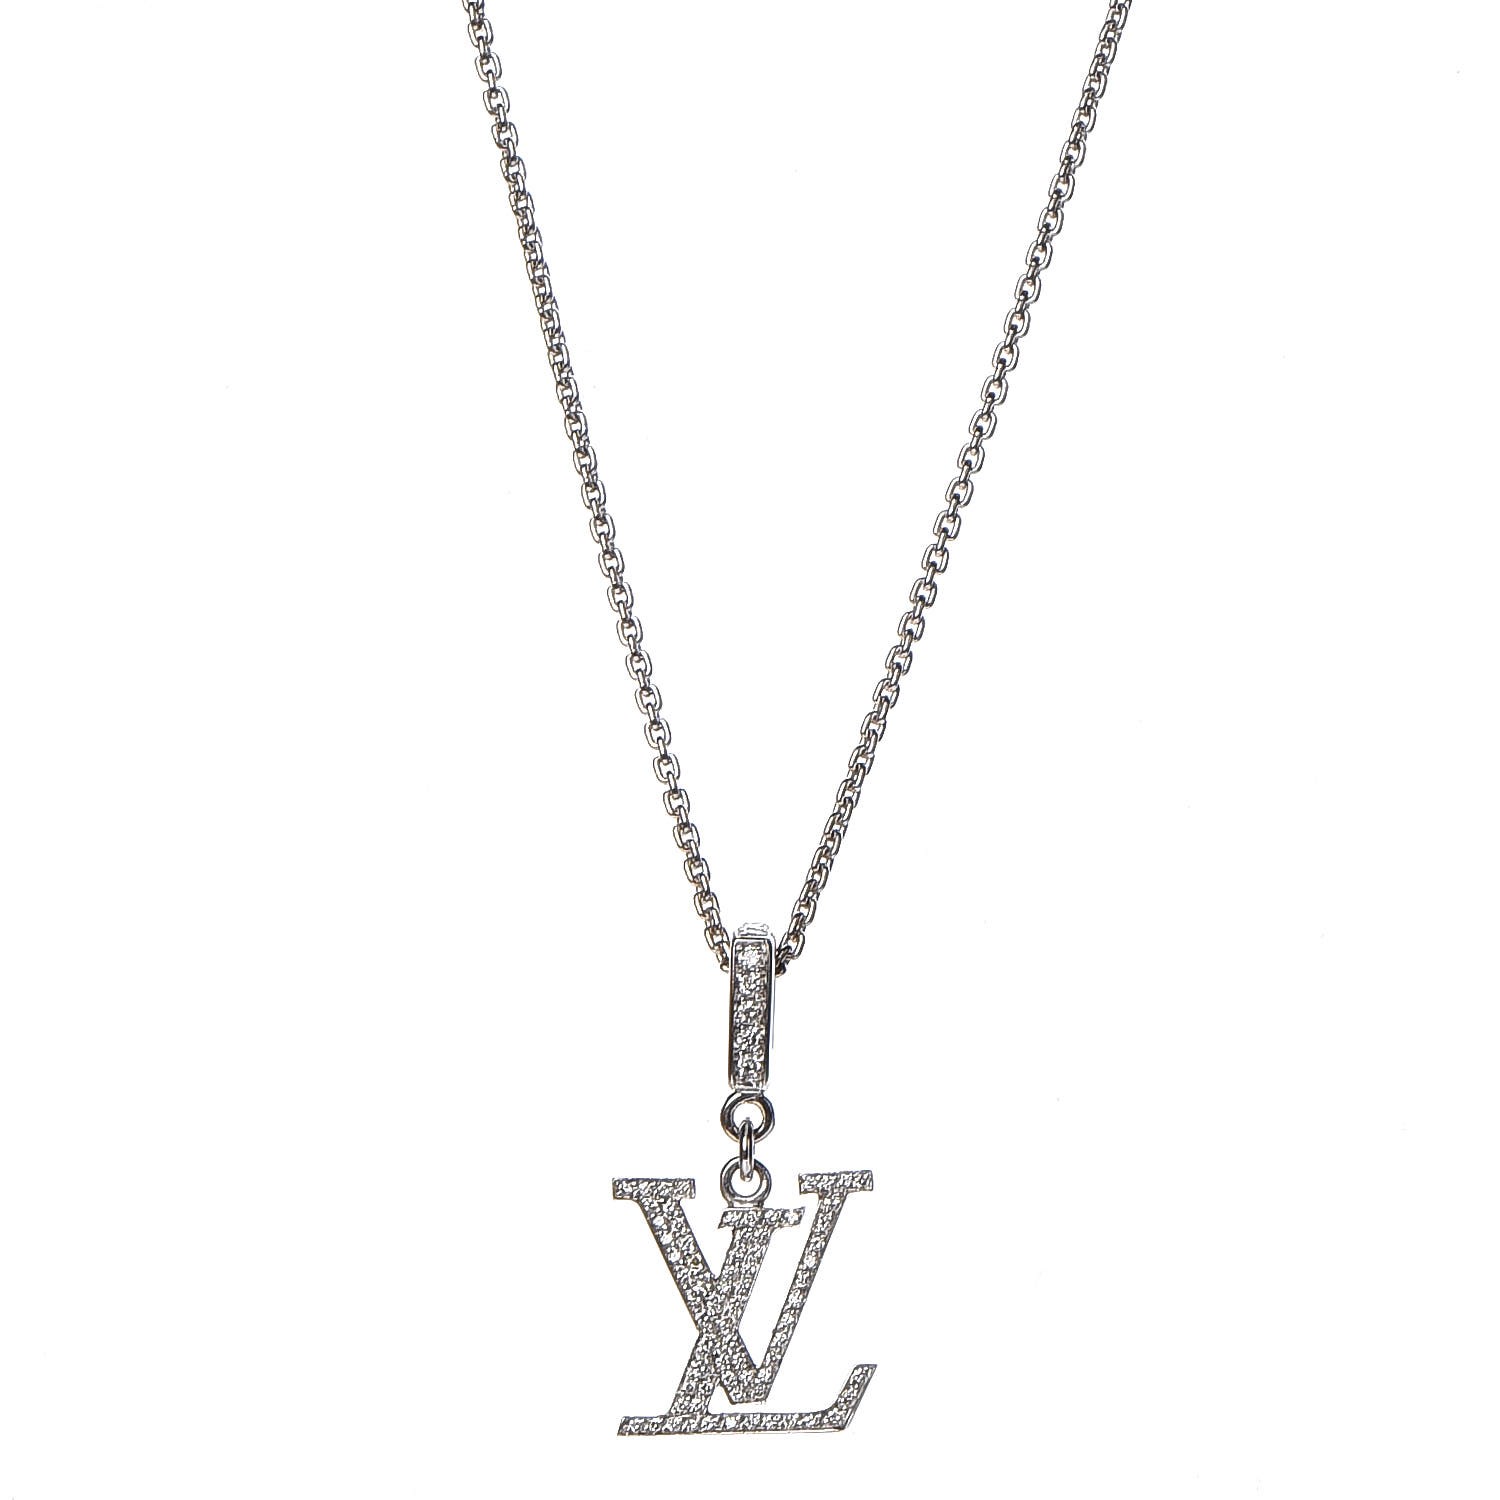 Shop Louis Vuitton Monogram carved necklace (M62484) by lifeisfun